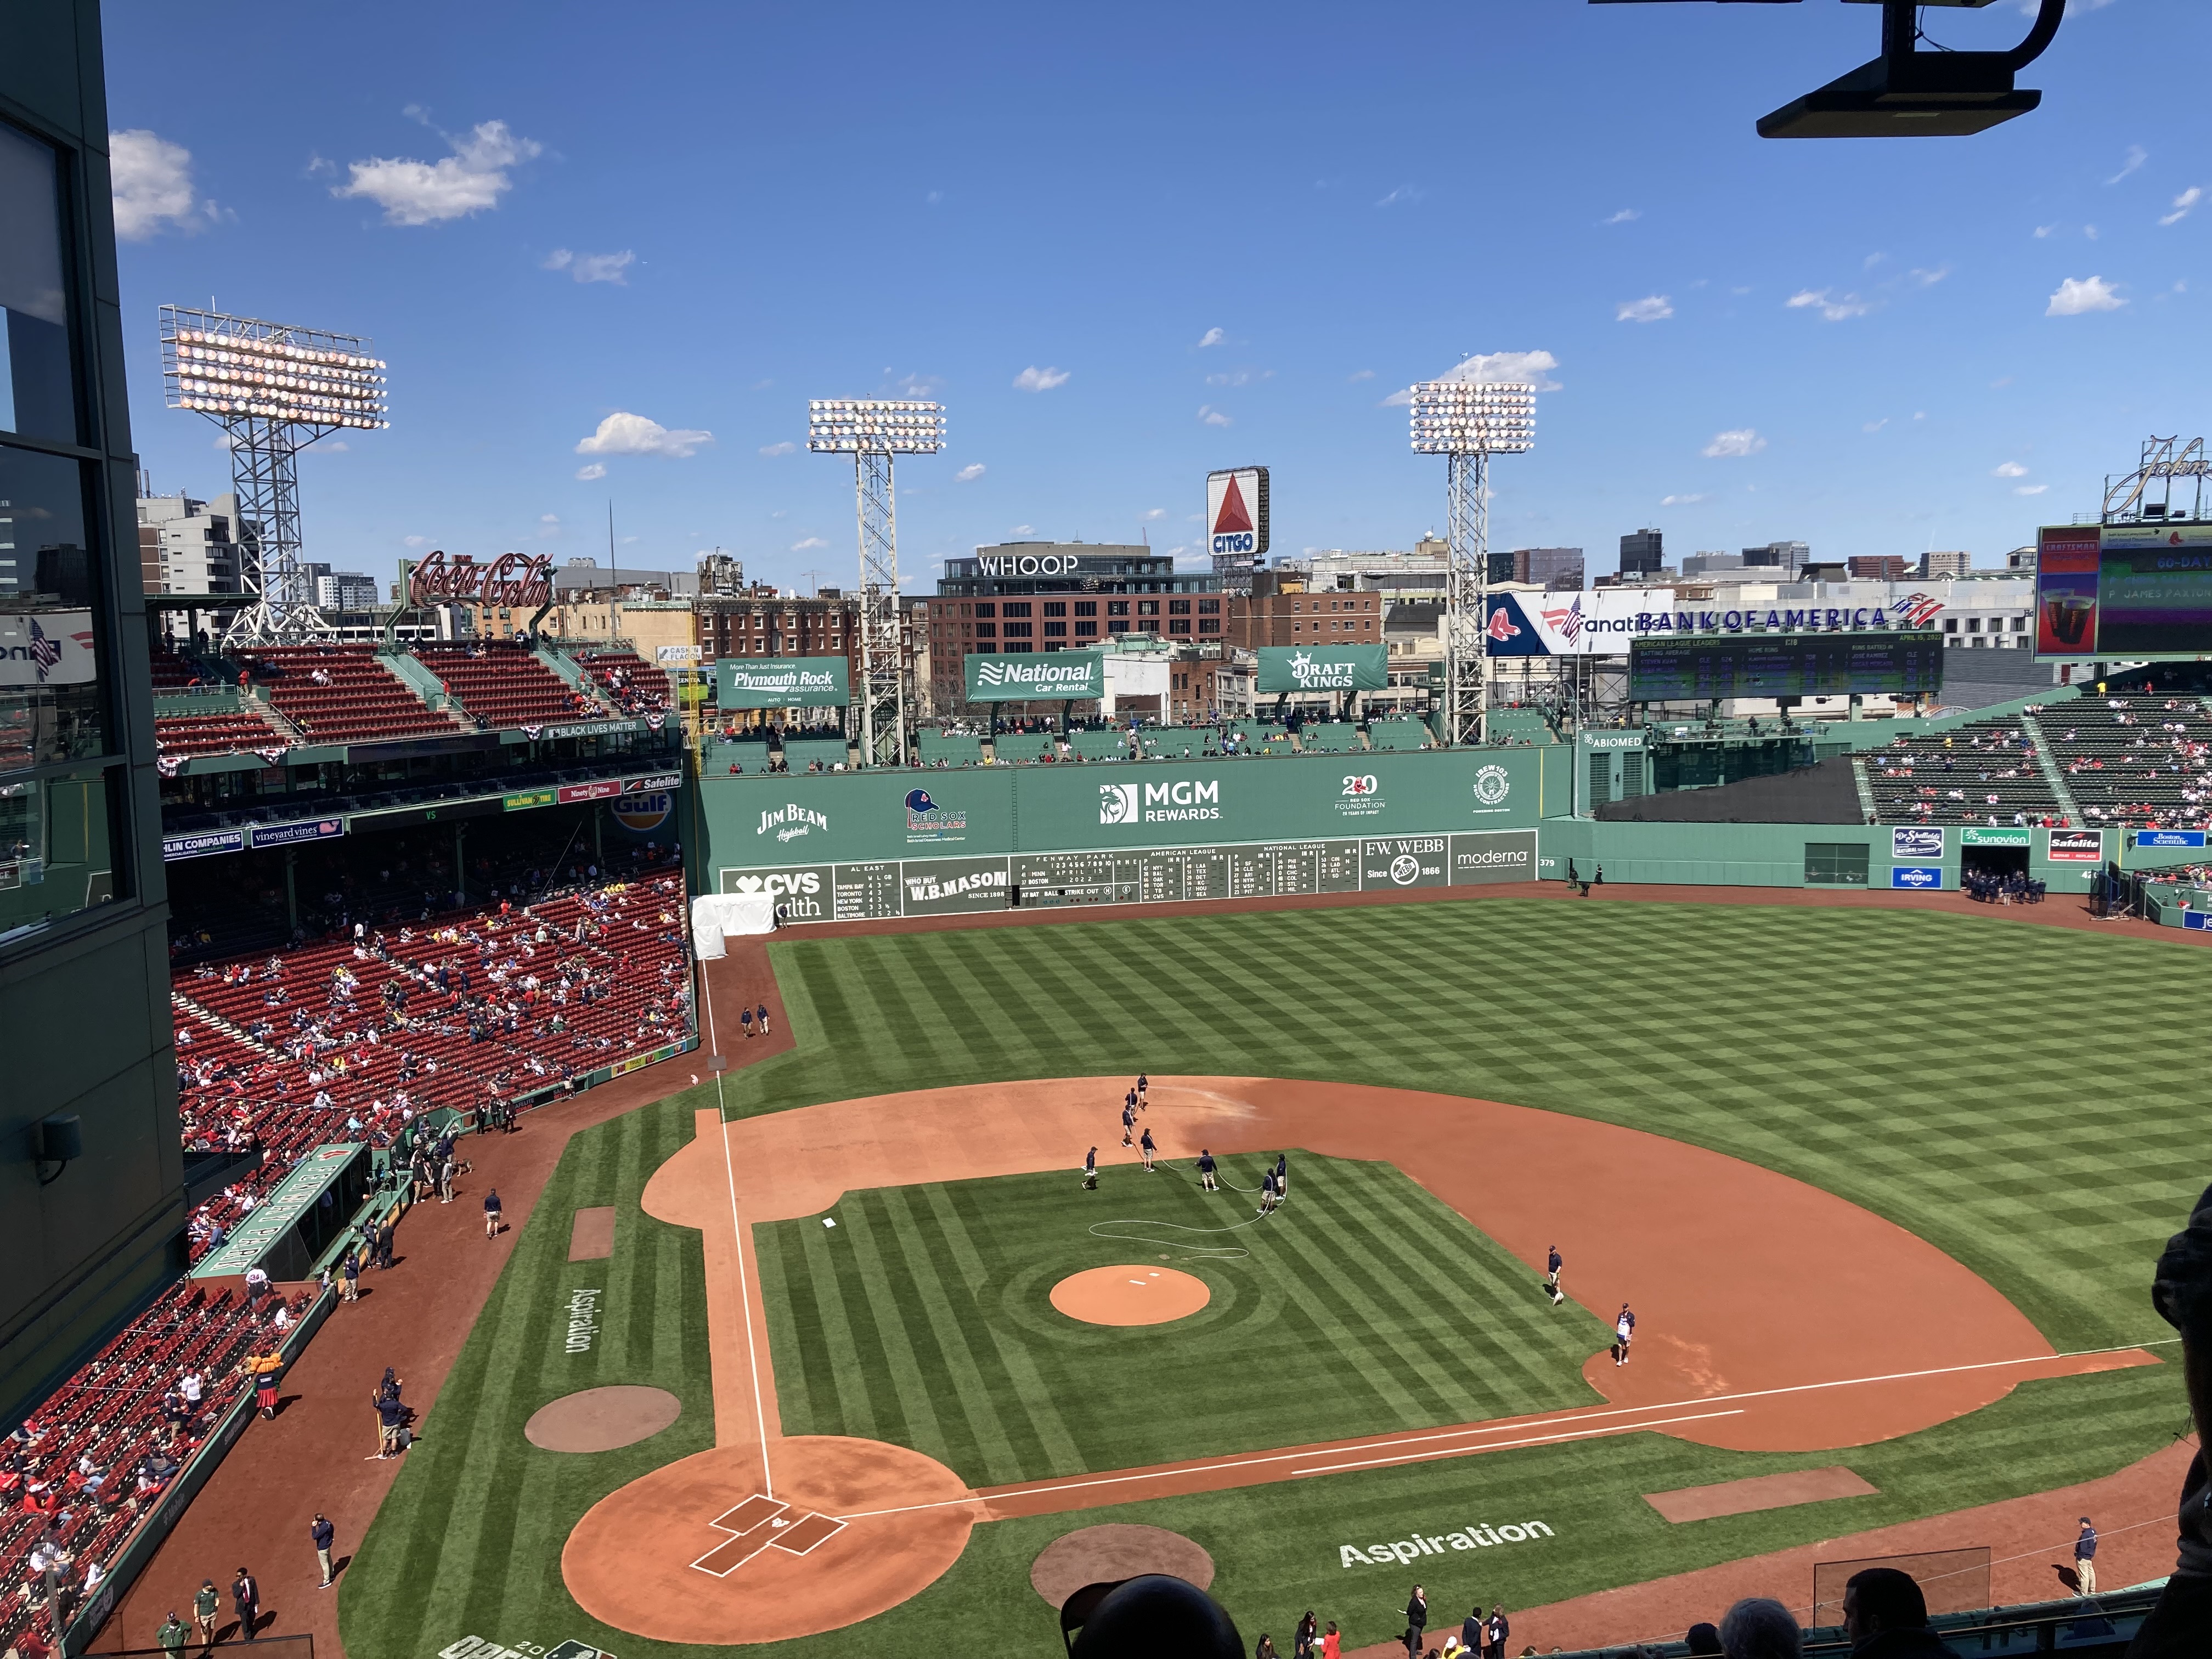 Pass or fail: Red Sox to wear yellow uniforms as tribute to Boston